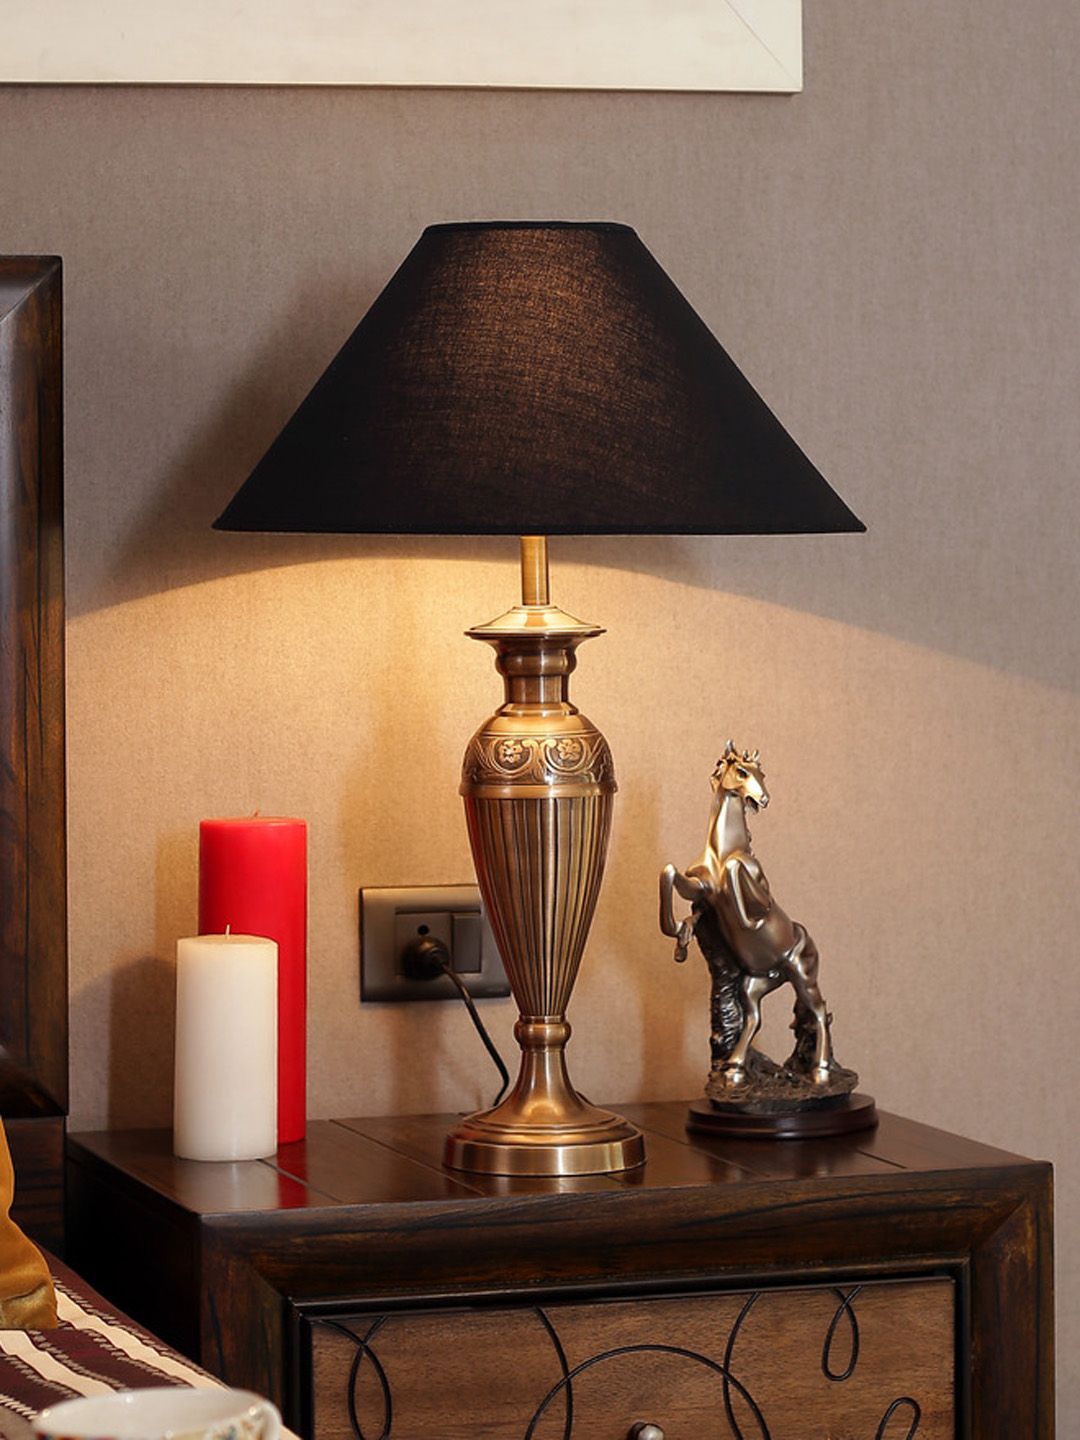 THE LIGHT STORE Antique Gold-Toned & Black Bedside Standard Lamp Price in India